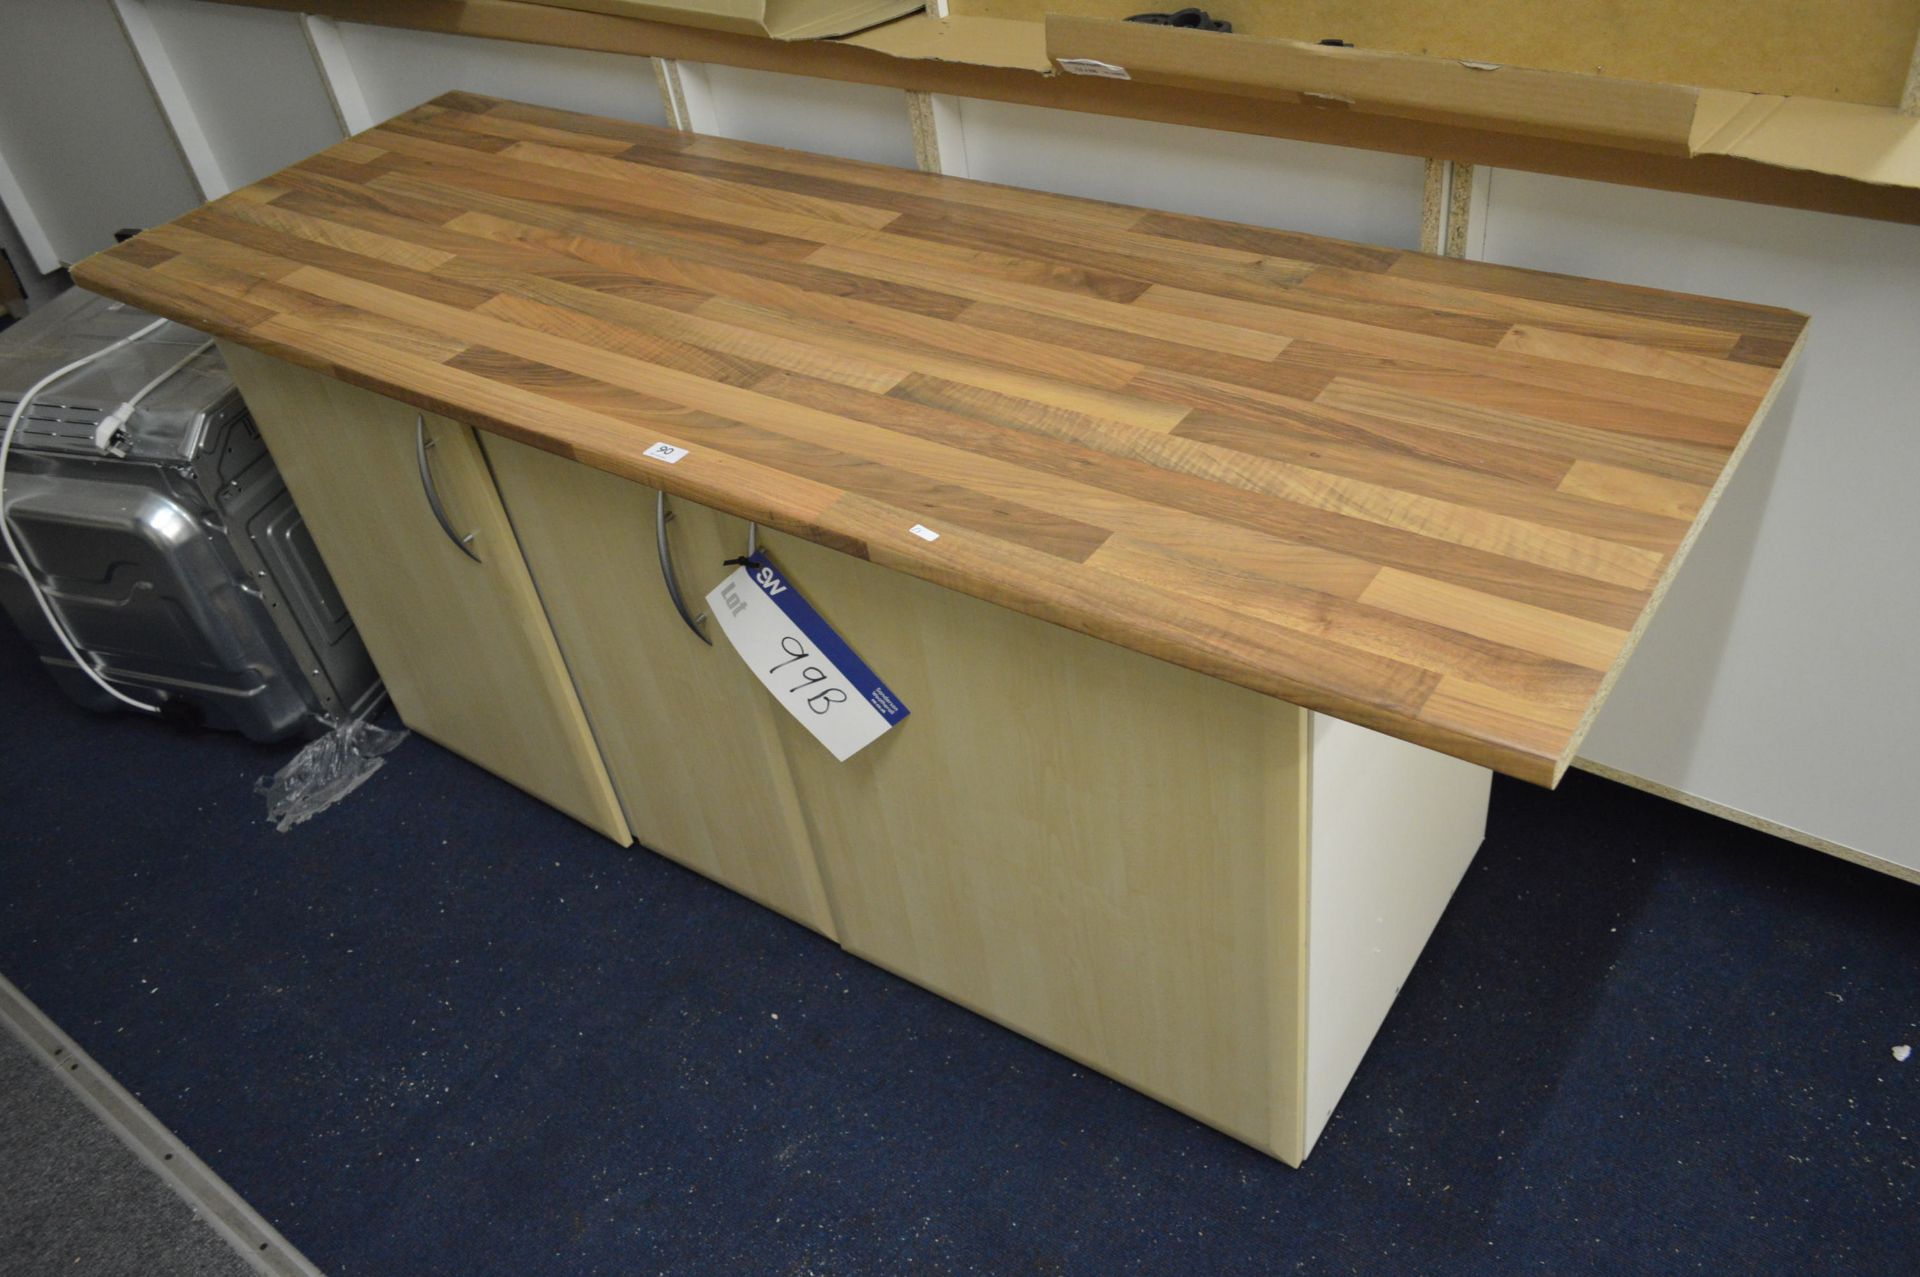 Two Base Units, 1.4m wide, with worktop